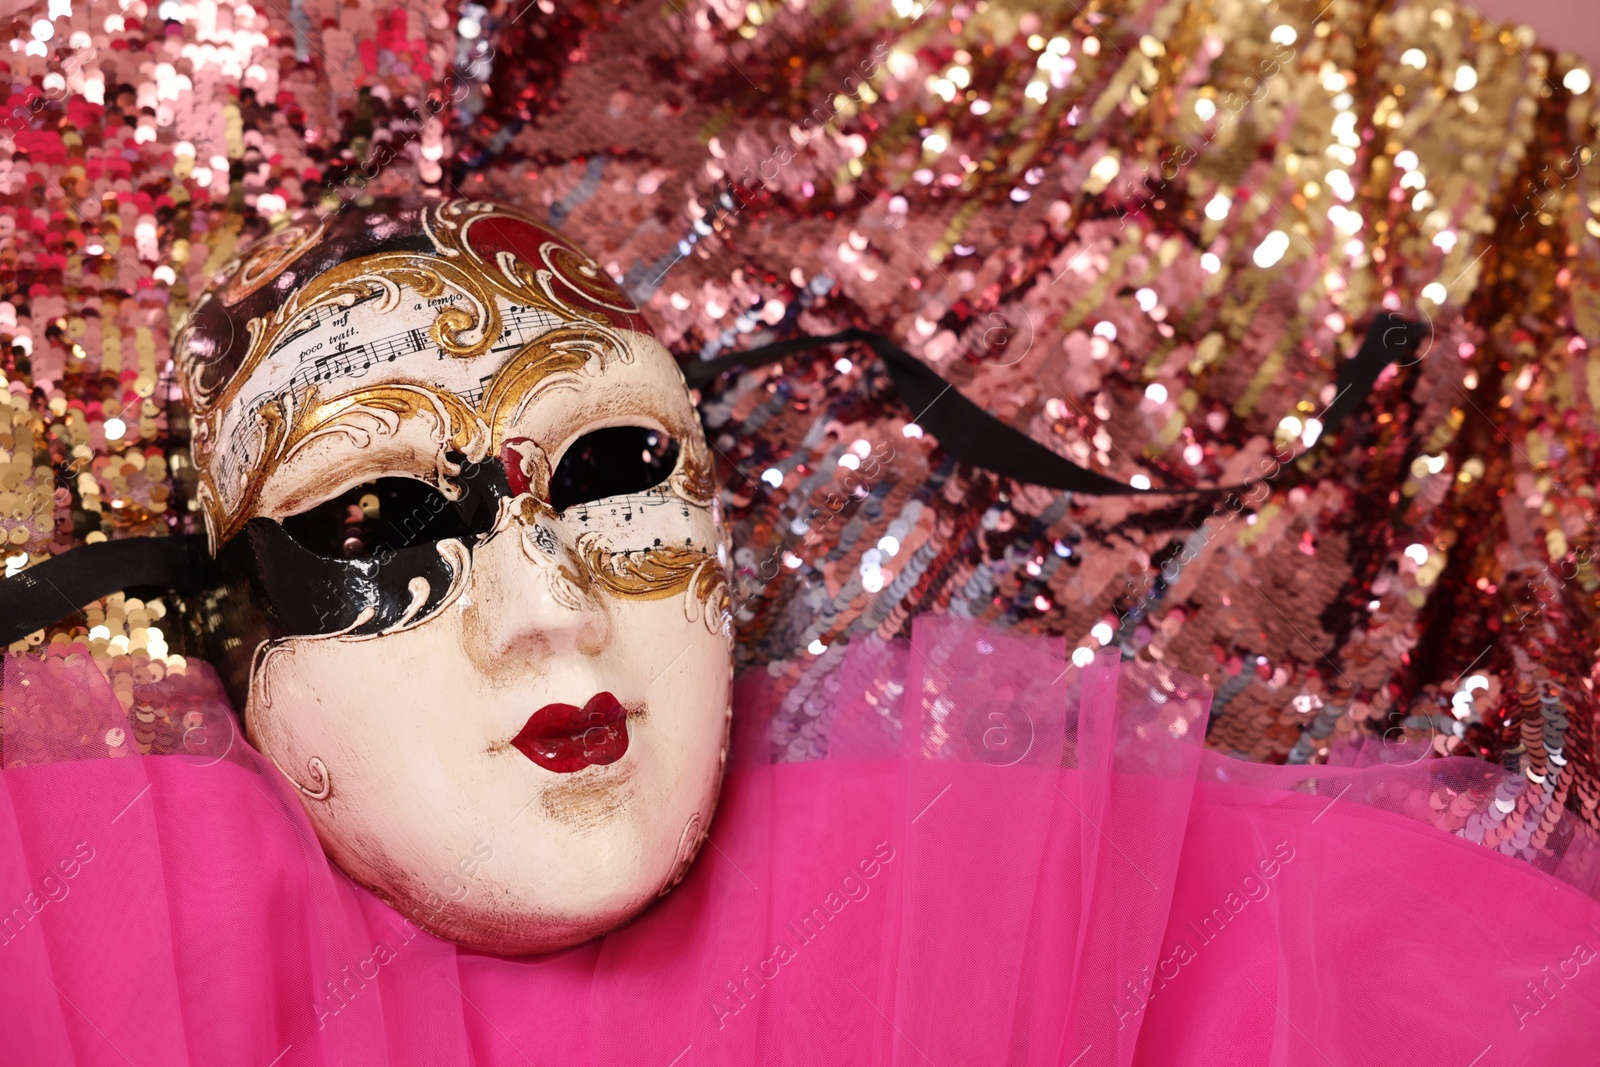 Photo of Carnival mask and beautiful pink costume with sequins, above view